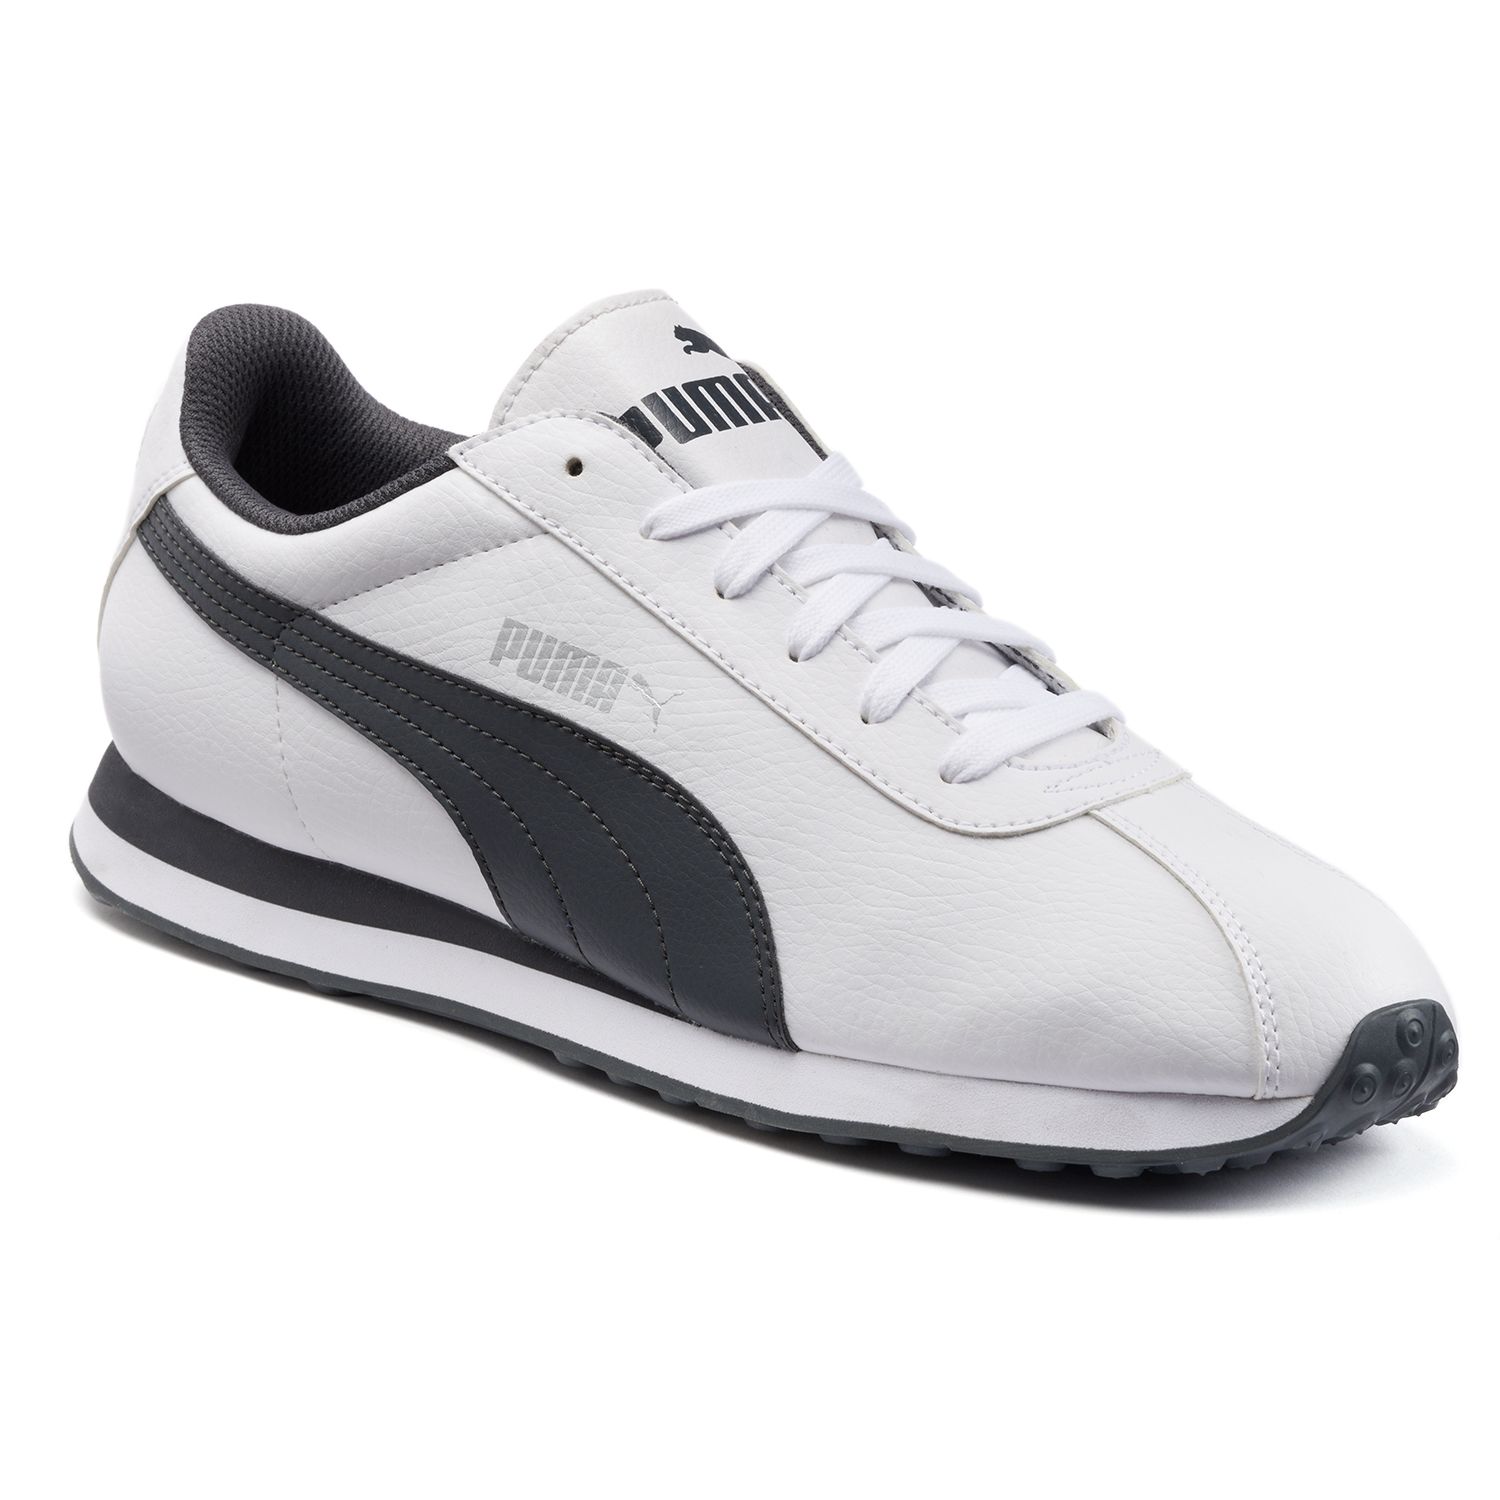 PUMA Turin Men's Leather Sneakers